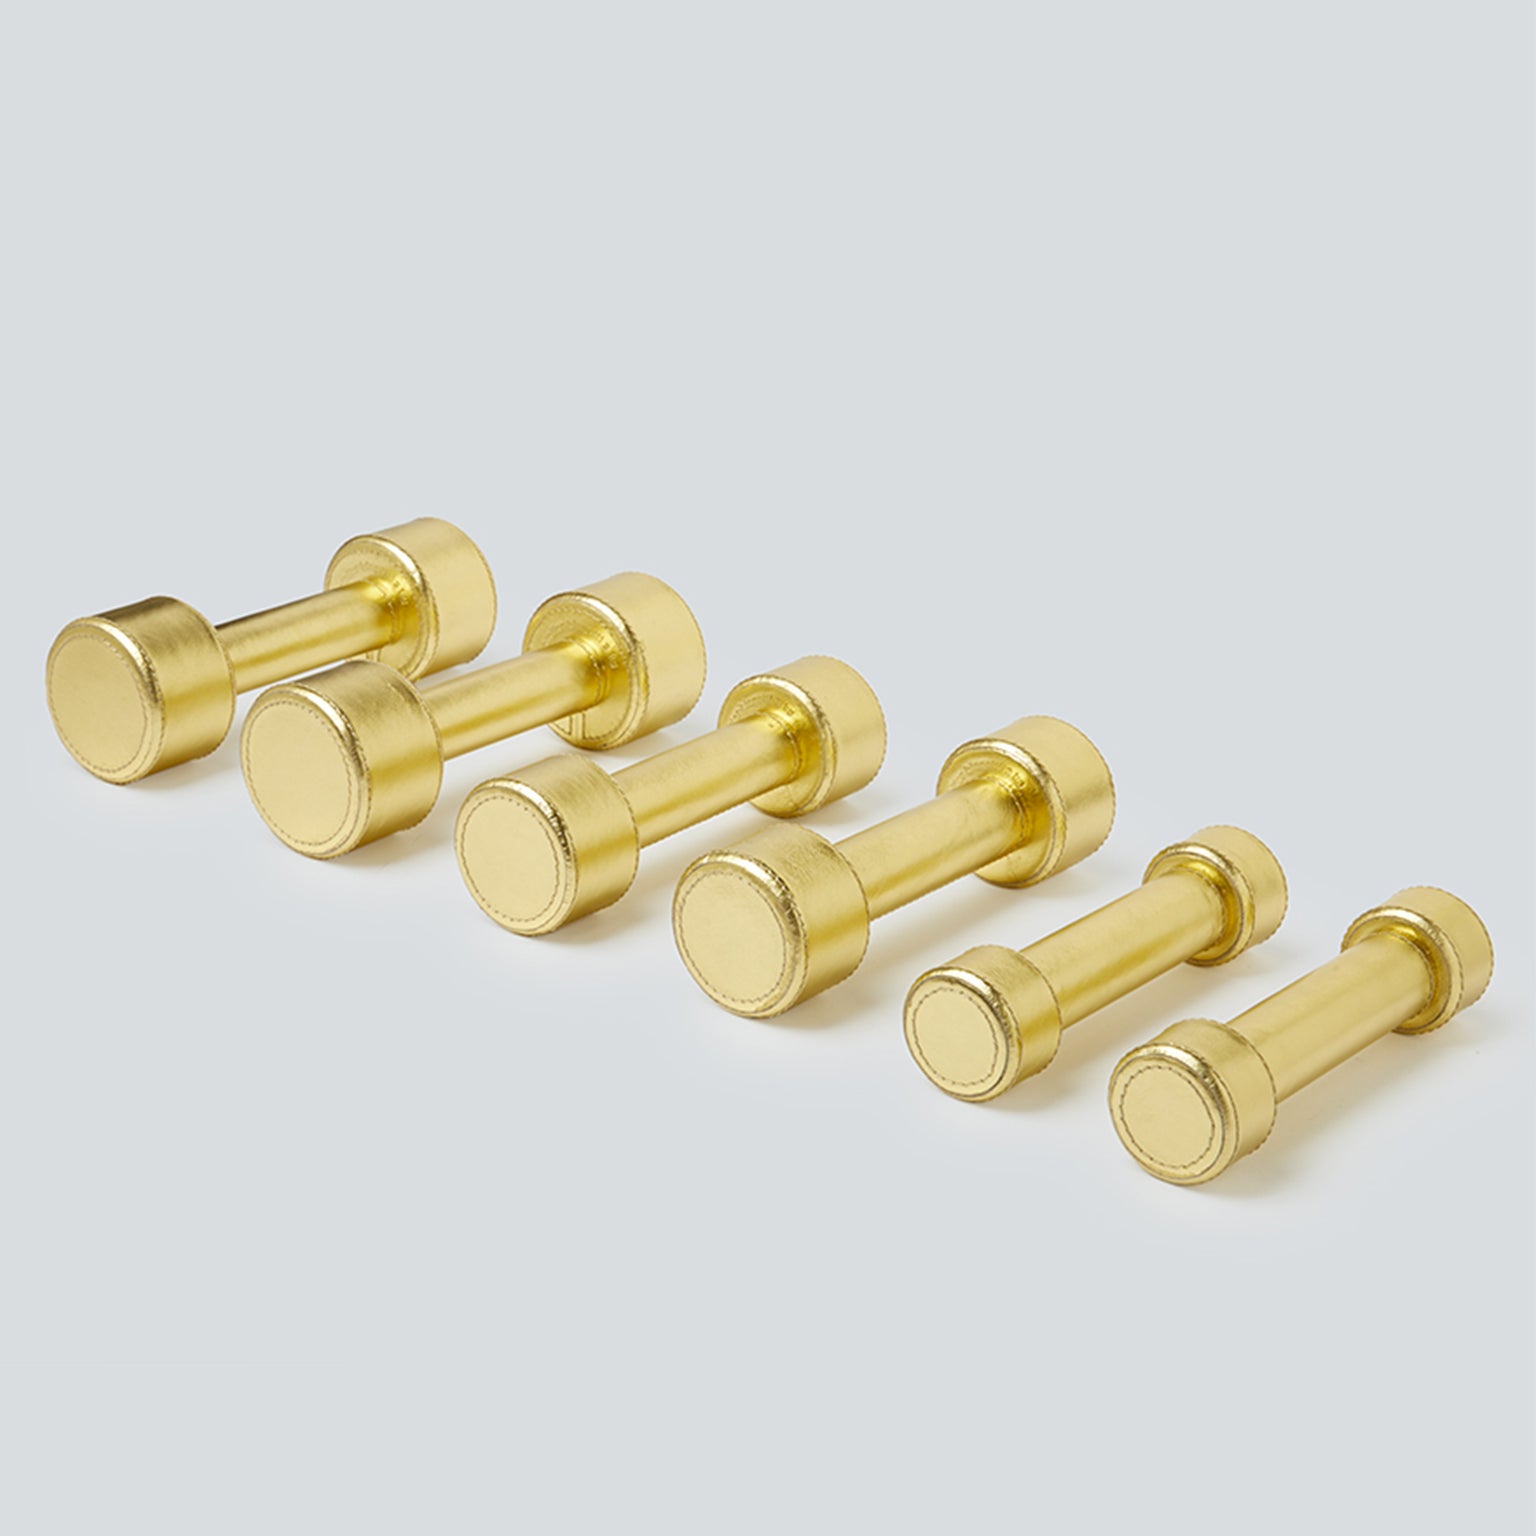 Dumbbell Set in Stainless Steel Covered in Gold Leather, Atelier Biagetti For Sale